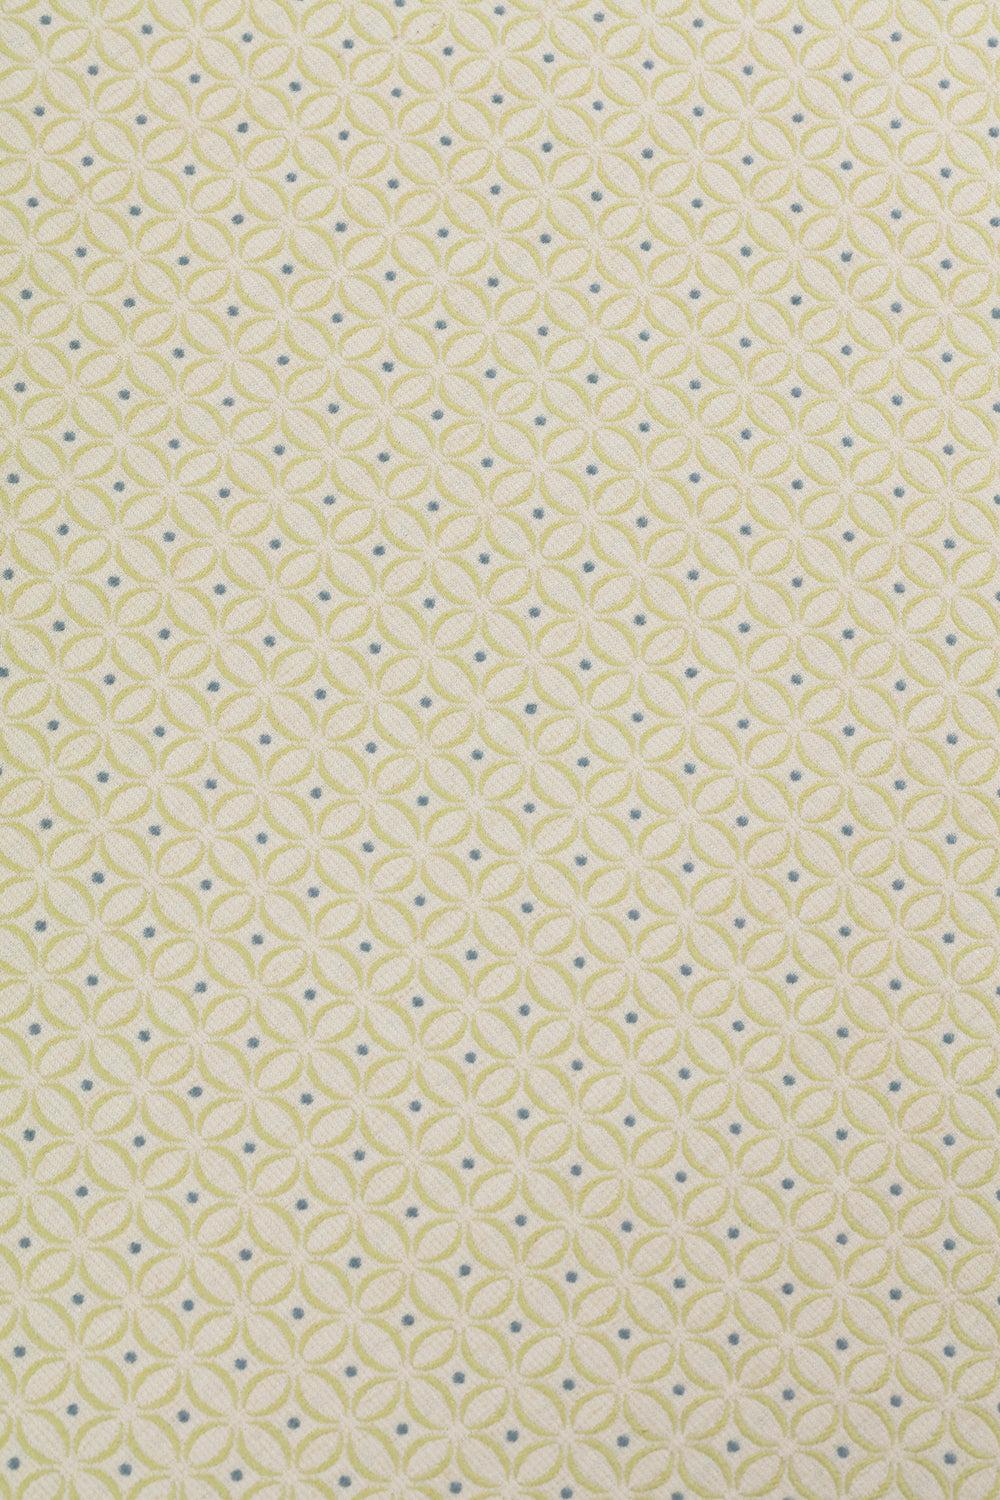 Detail of woven fabric in a geometric grid print in yellow and blue on a tan field.